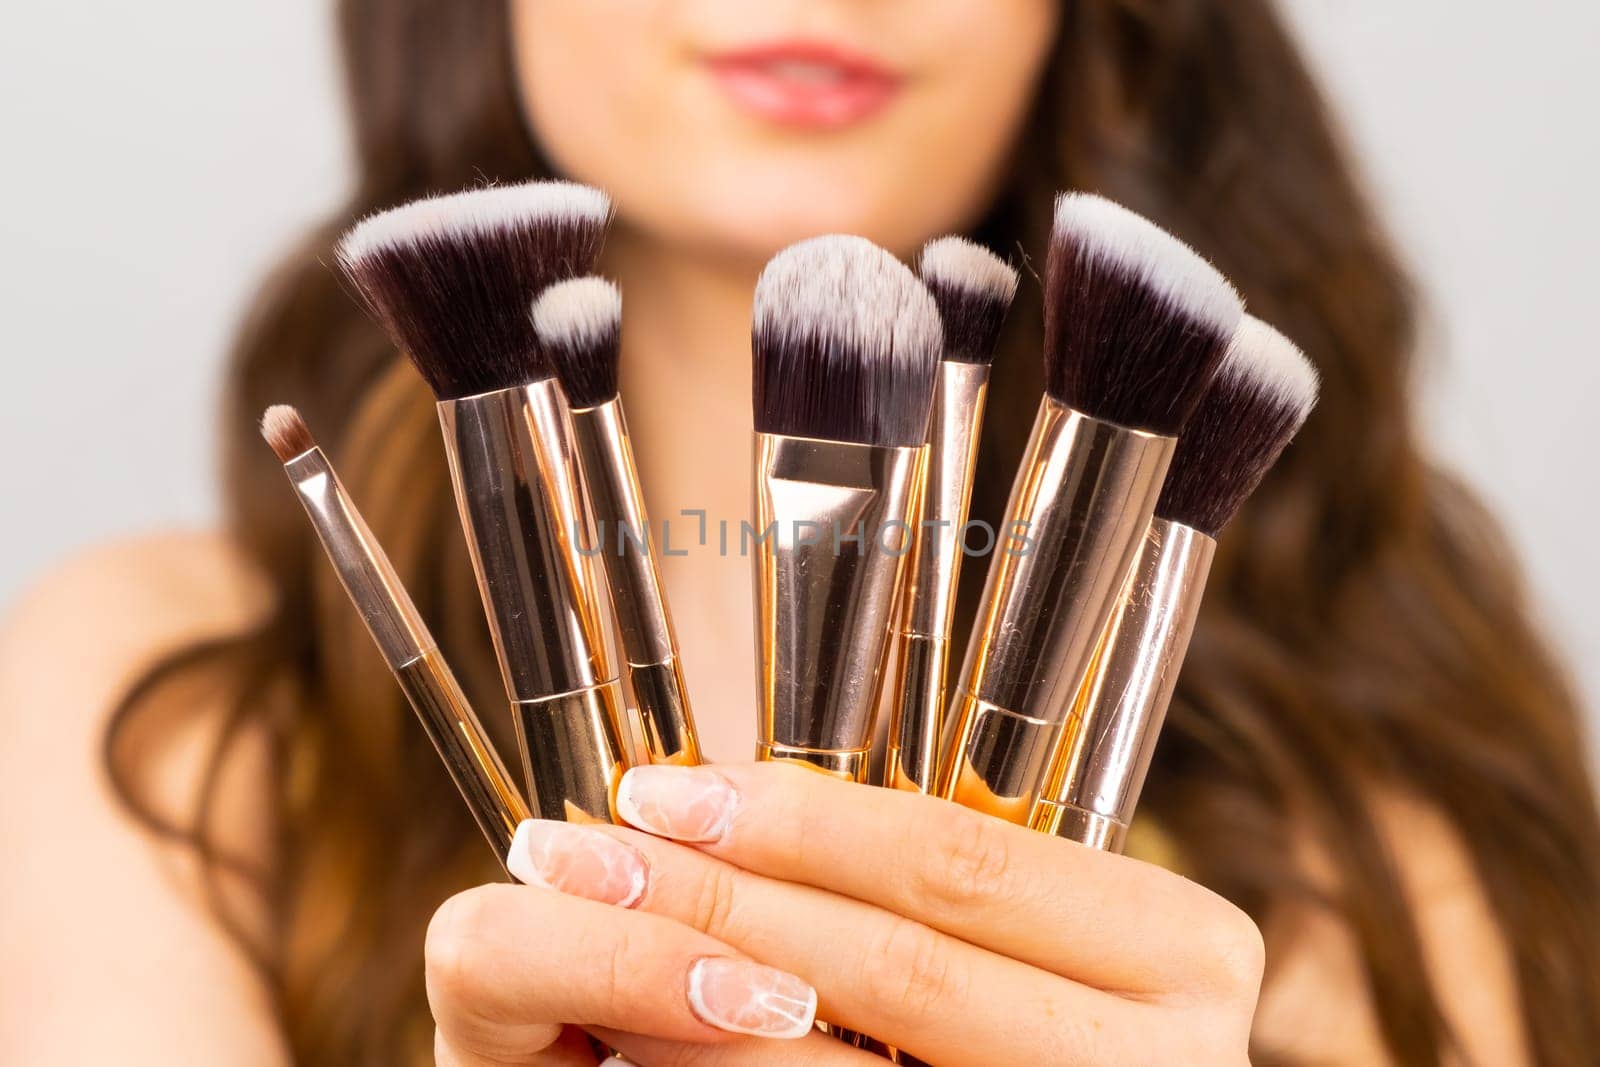 Golden makeup brushes in front of woman face.